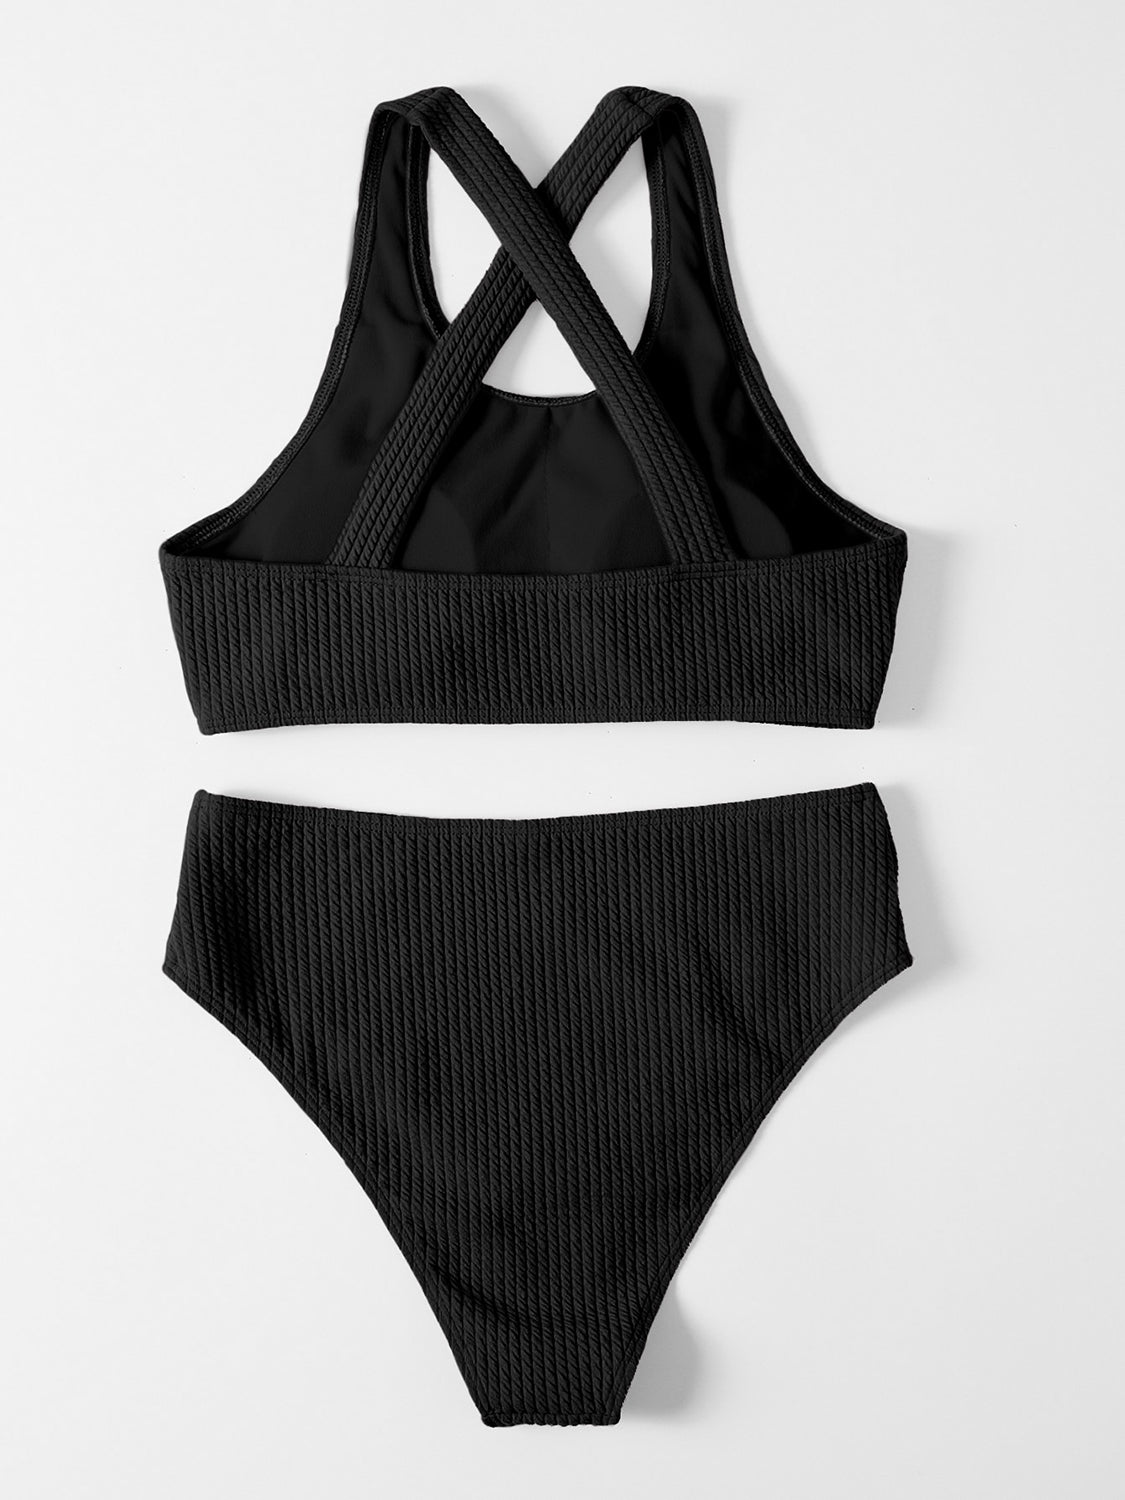 "Elevate your poolside look with our chic Crisscross Two-Piece Swim Set, perfect for making a stylish splash in white or black."